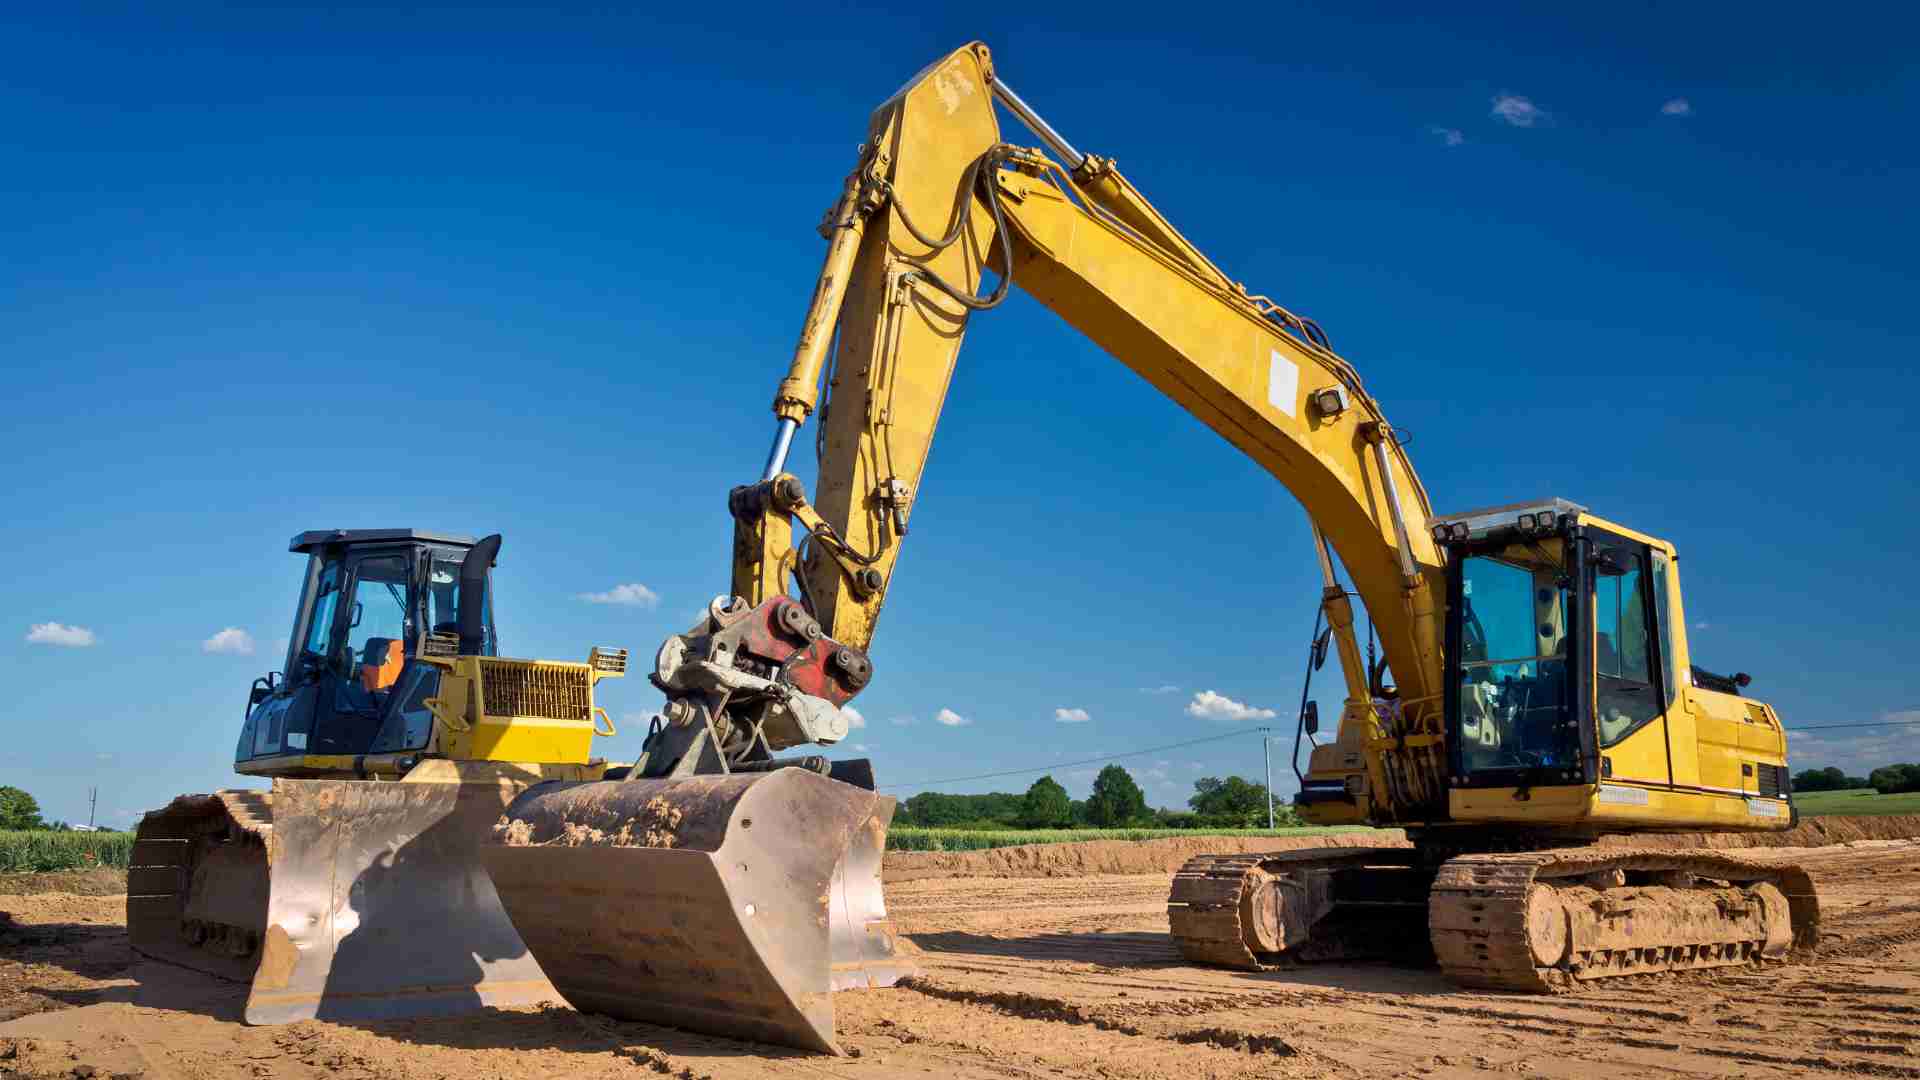 Two yellow heavy machines on a construction site